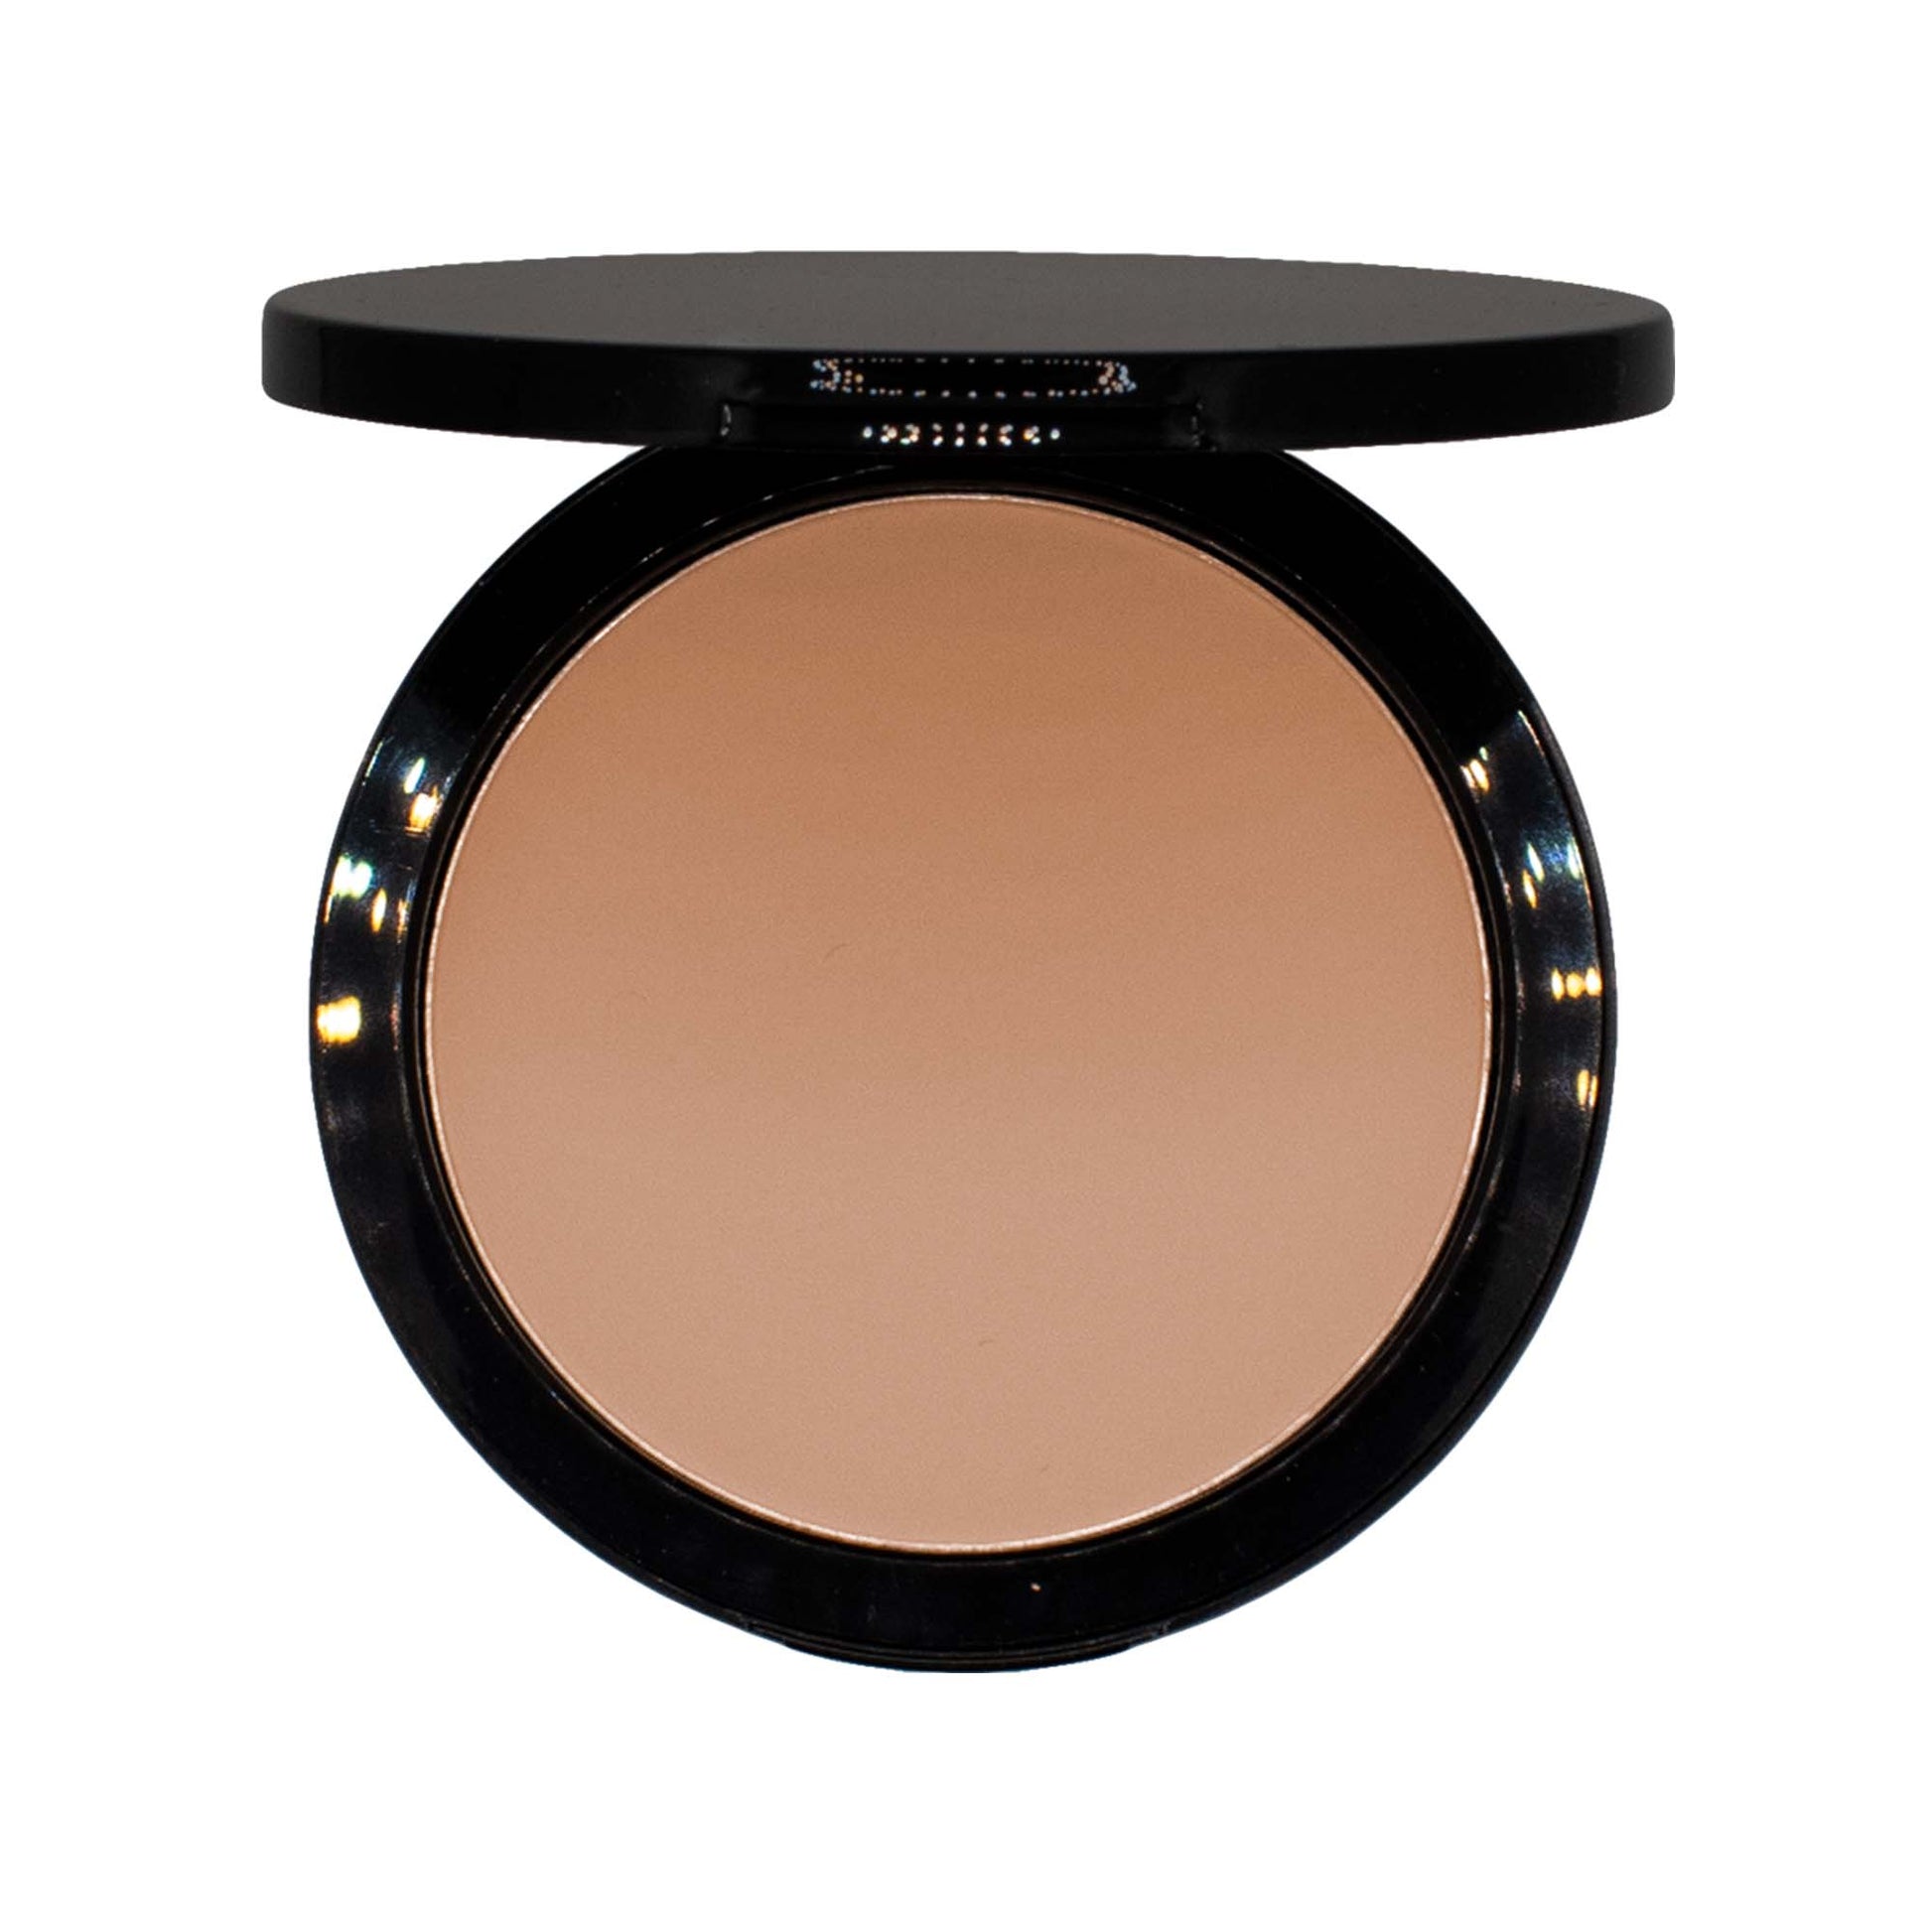  The lightweight powder foundation effortlessly blends into the skin, providing a flawless and natural-looking finish. Its buildable coverage allows you to customize the desired level of coverage, whether you prefer a sheer or more full coverage look.